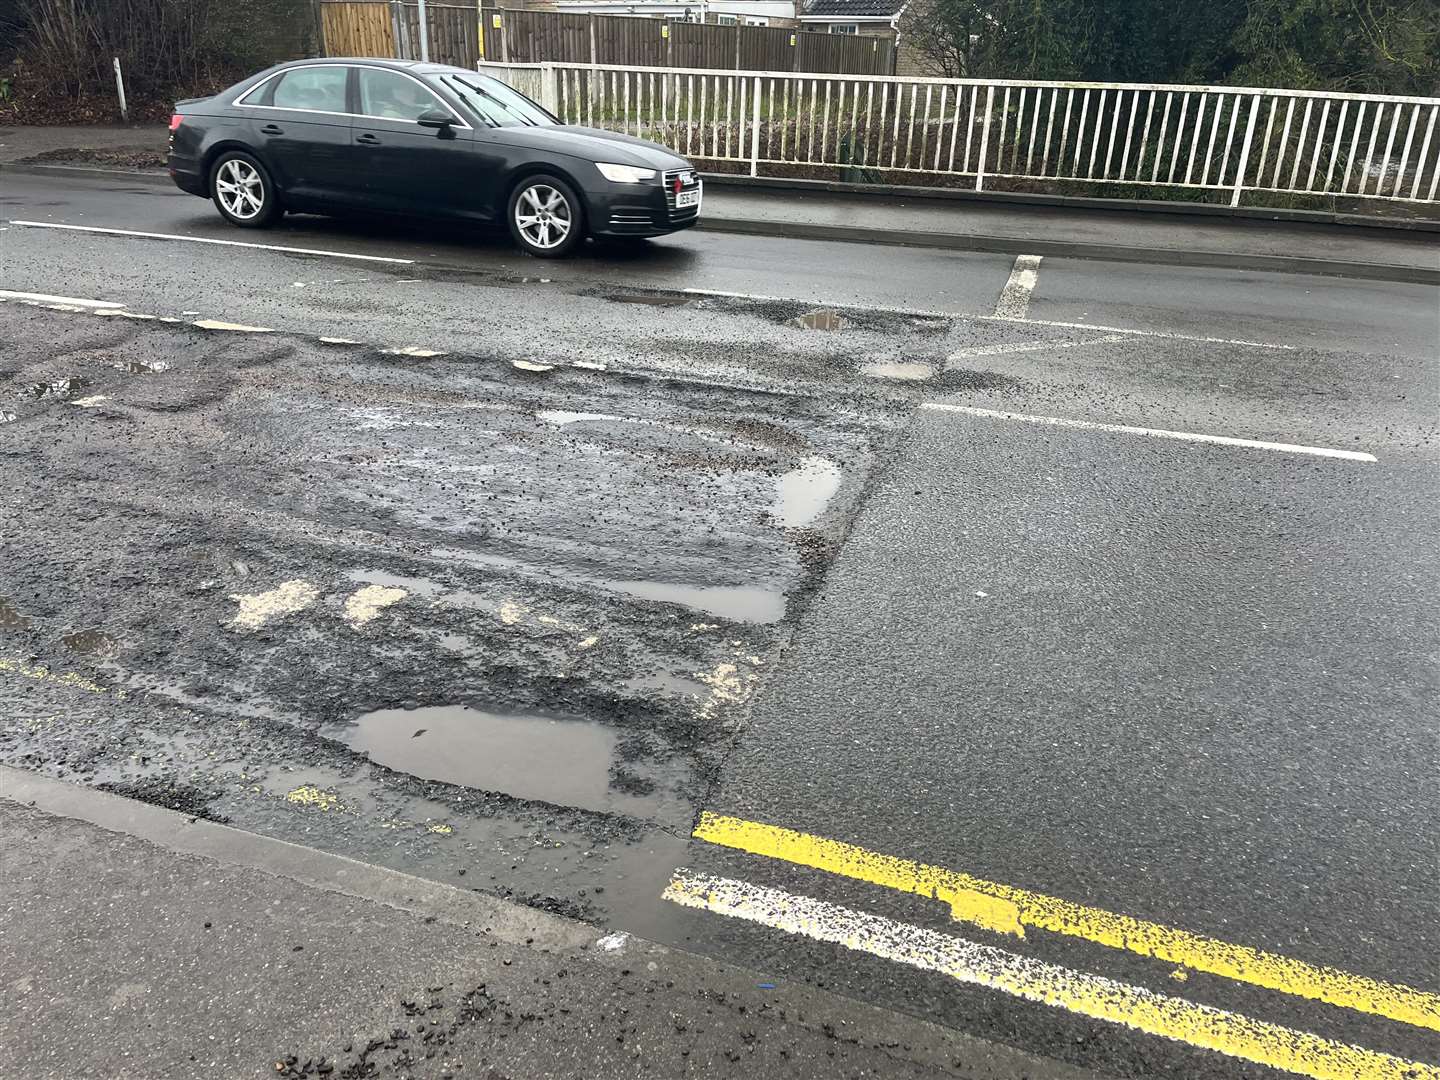 Motorists say it is impossible to dodge any dips in the road